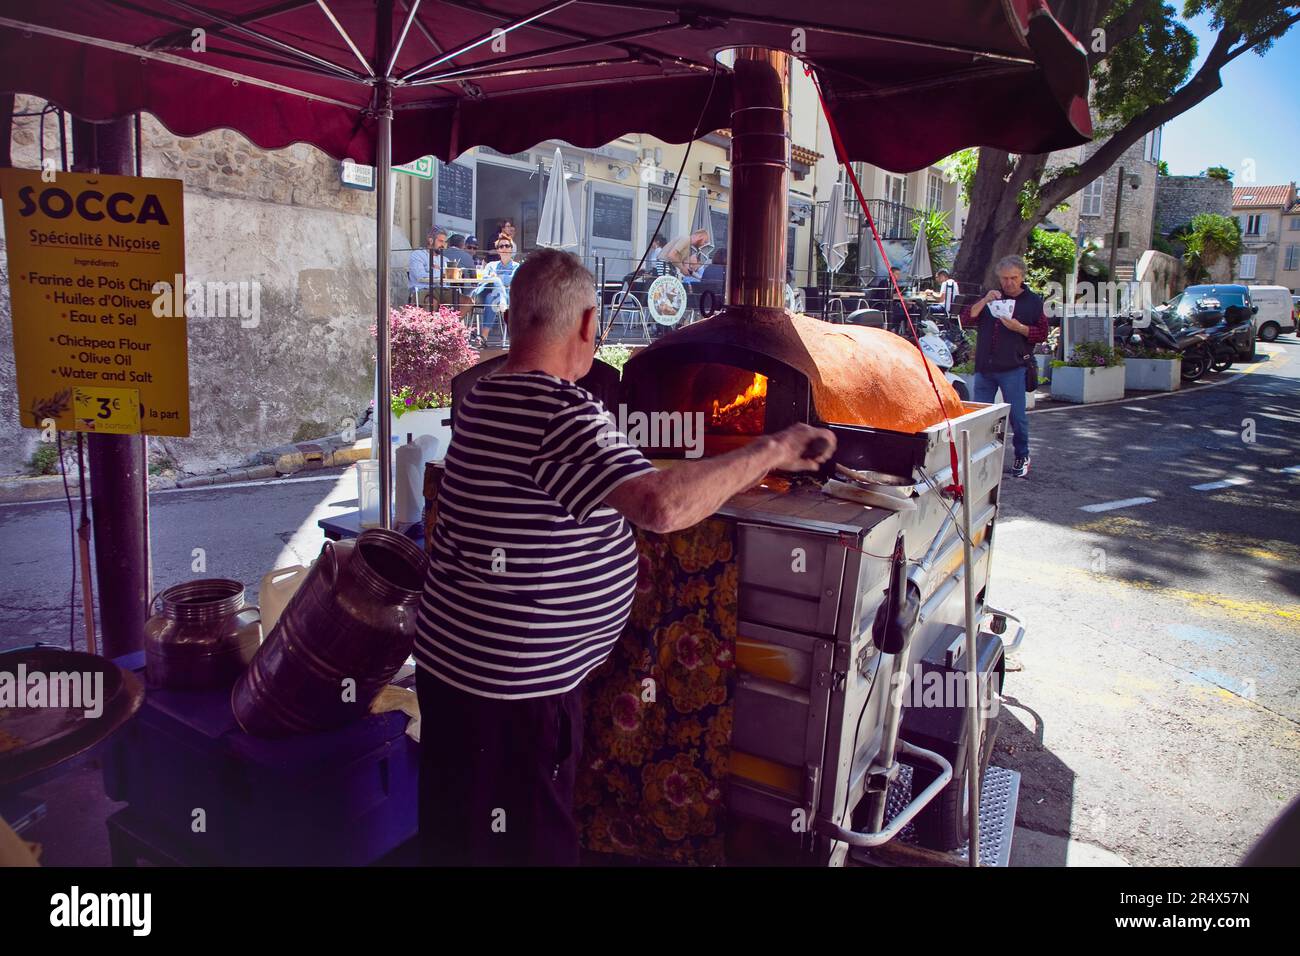 France, Provence-Alps, Cote d'Azur, Antibes, Cooking Socca an nicoise chickpea pancake Provencal food market. Stock Photo